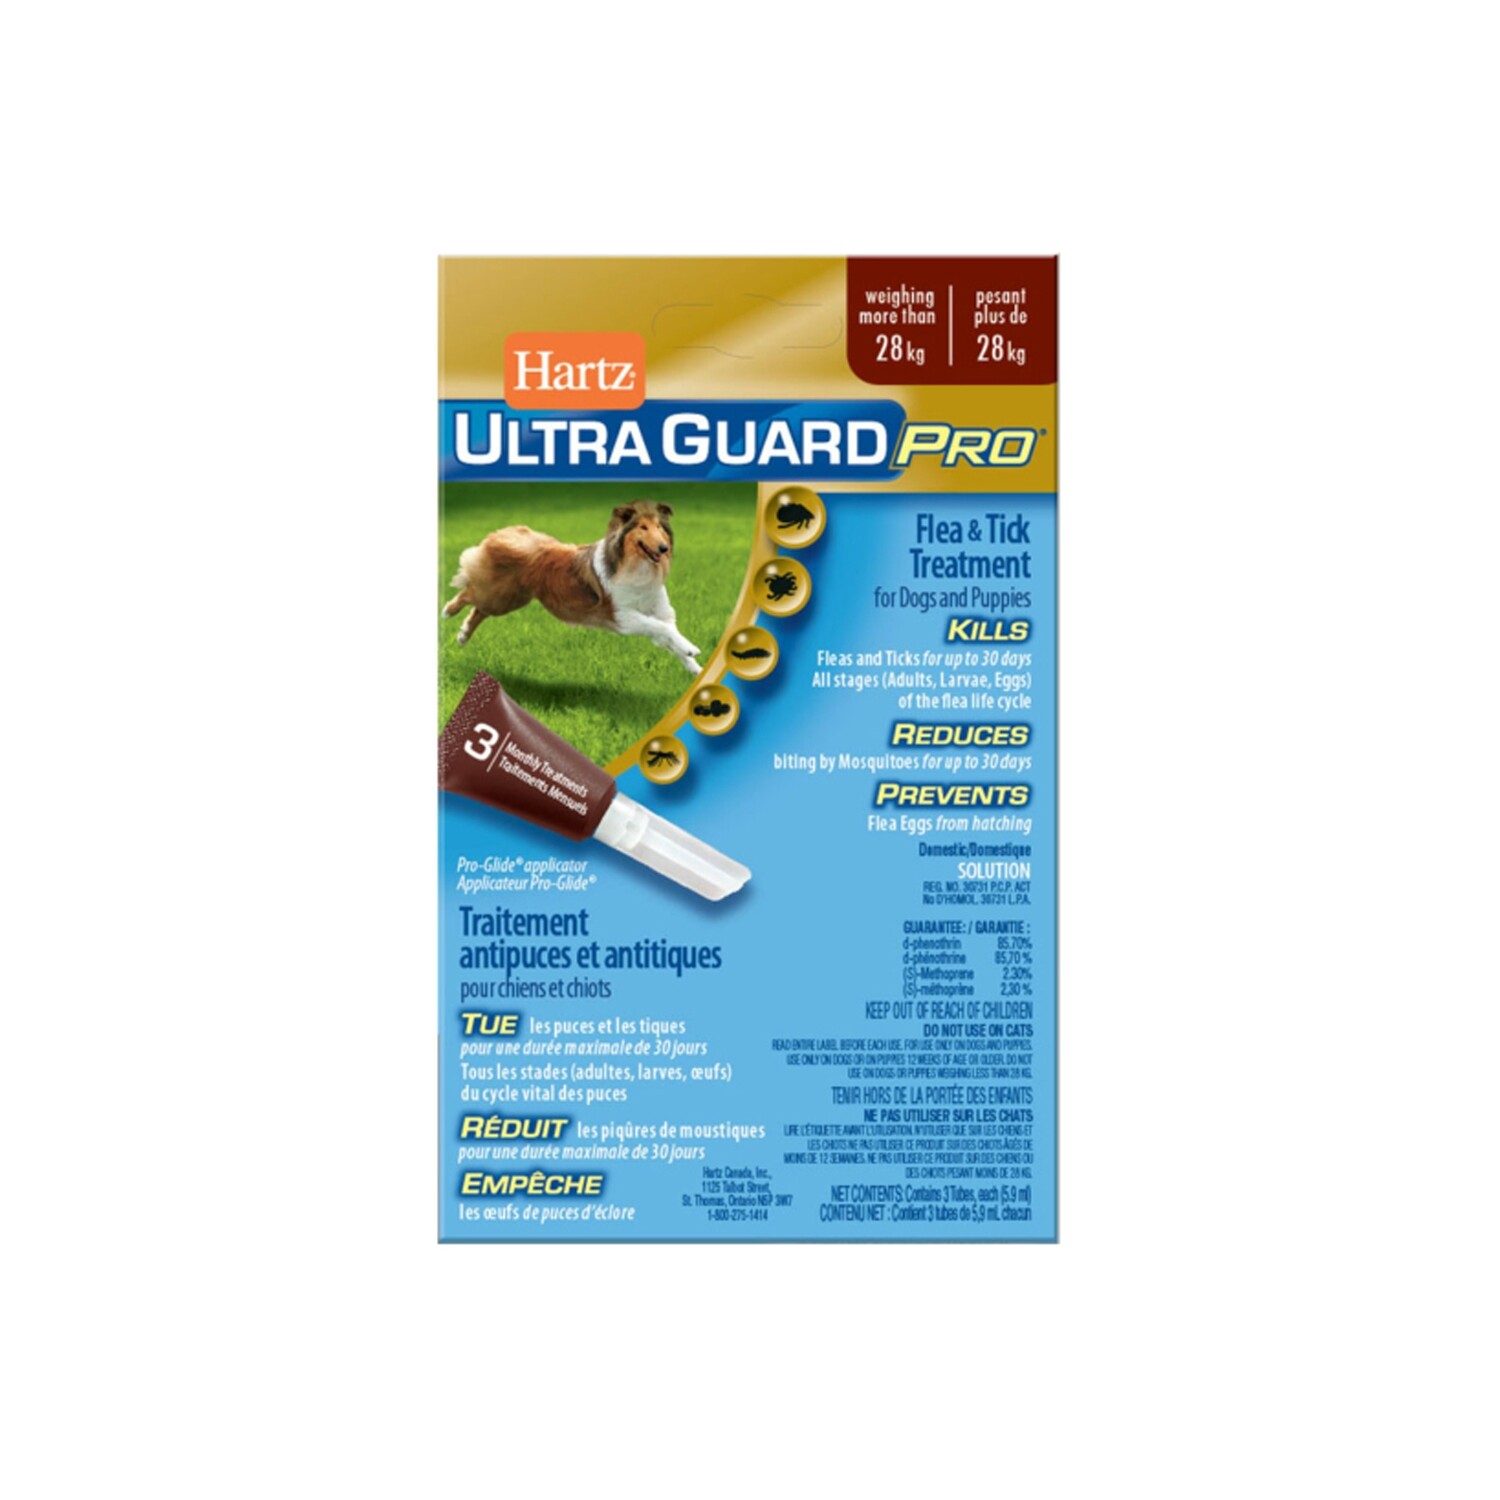 Hartz UltraGuard Pro Flea and Tick Treatment for Dogs and Puppies greater than 28kg-3 Tubes 大型犬用跳蚤和蜱虫体外除虫驱虫